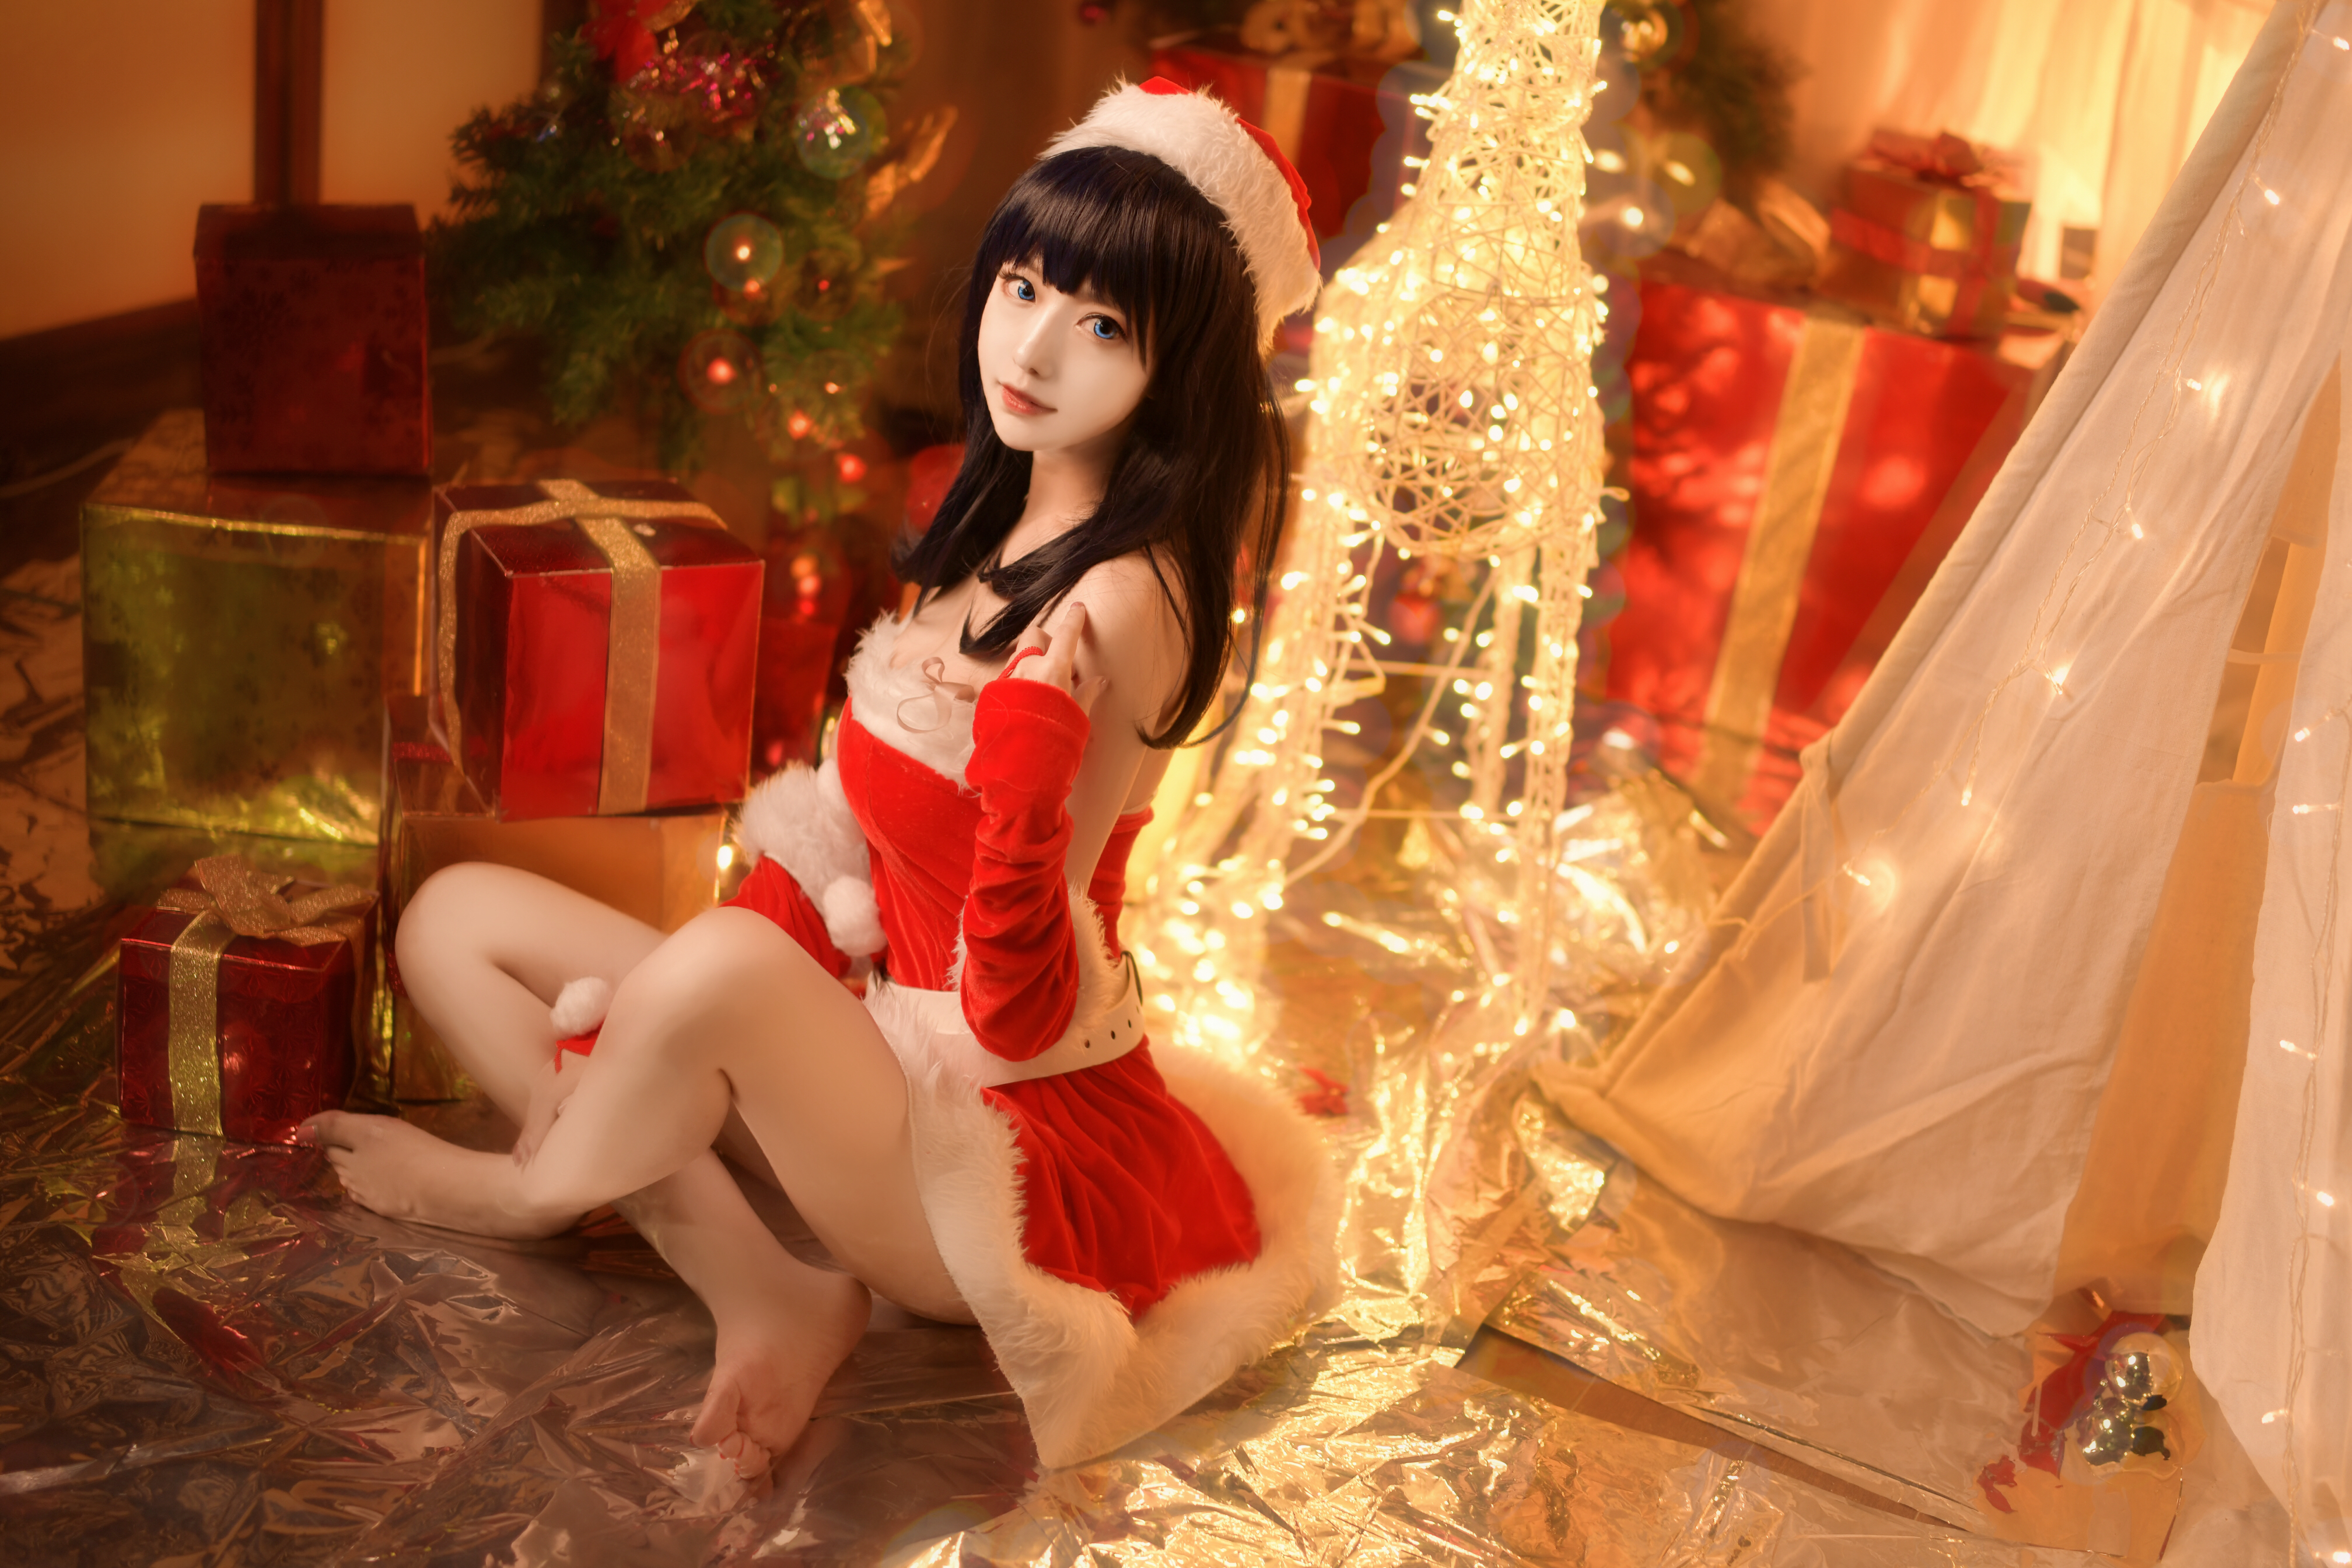 People 4032x2688 Christmas Christmas clothes Christmas lights Christmas Lingerie Christmas presents Asian long hair women model brunette Santa outfit barefoot